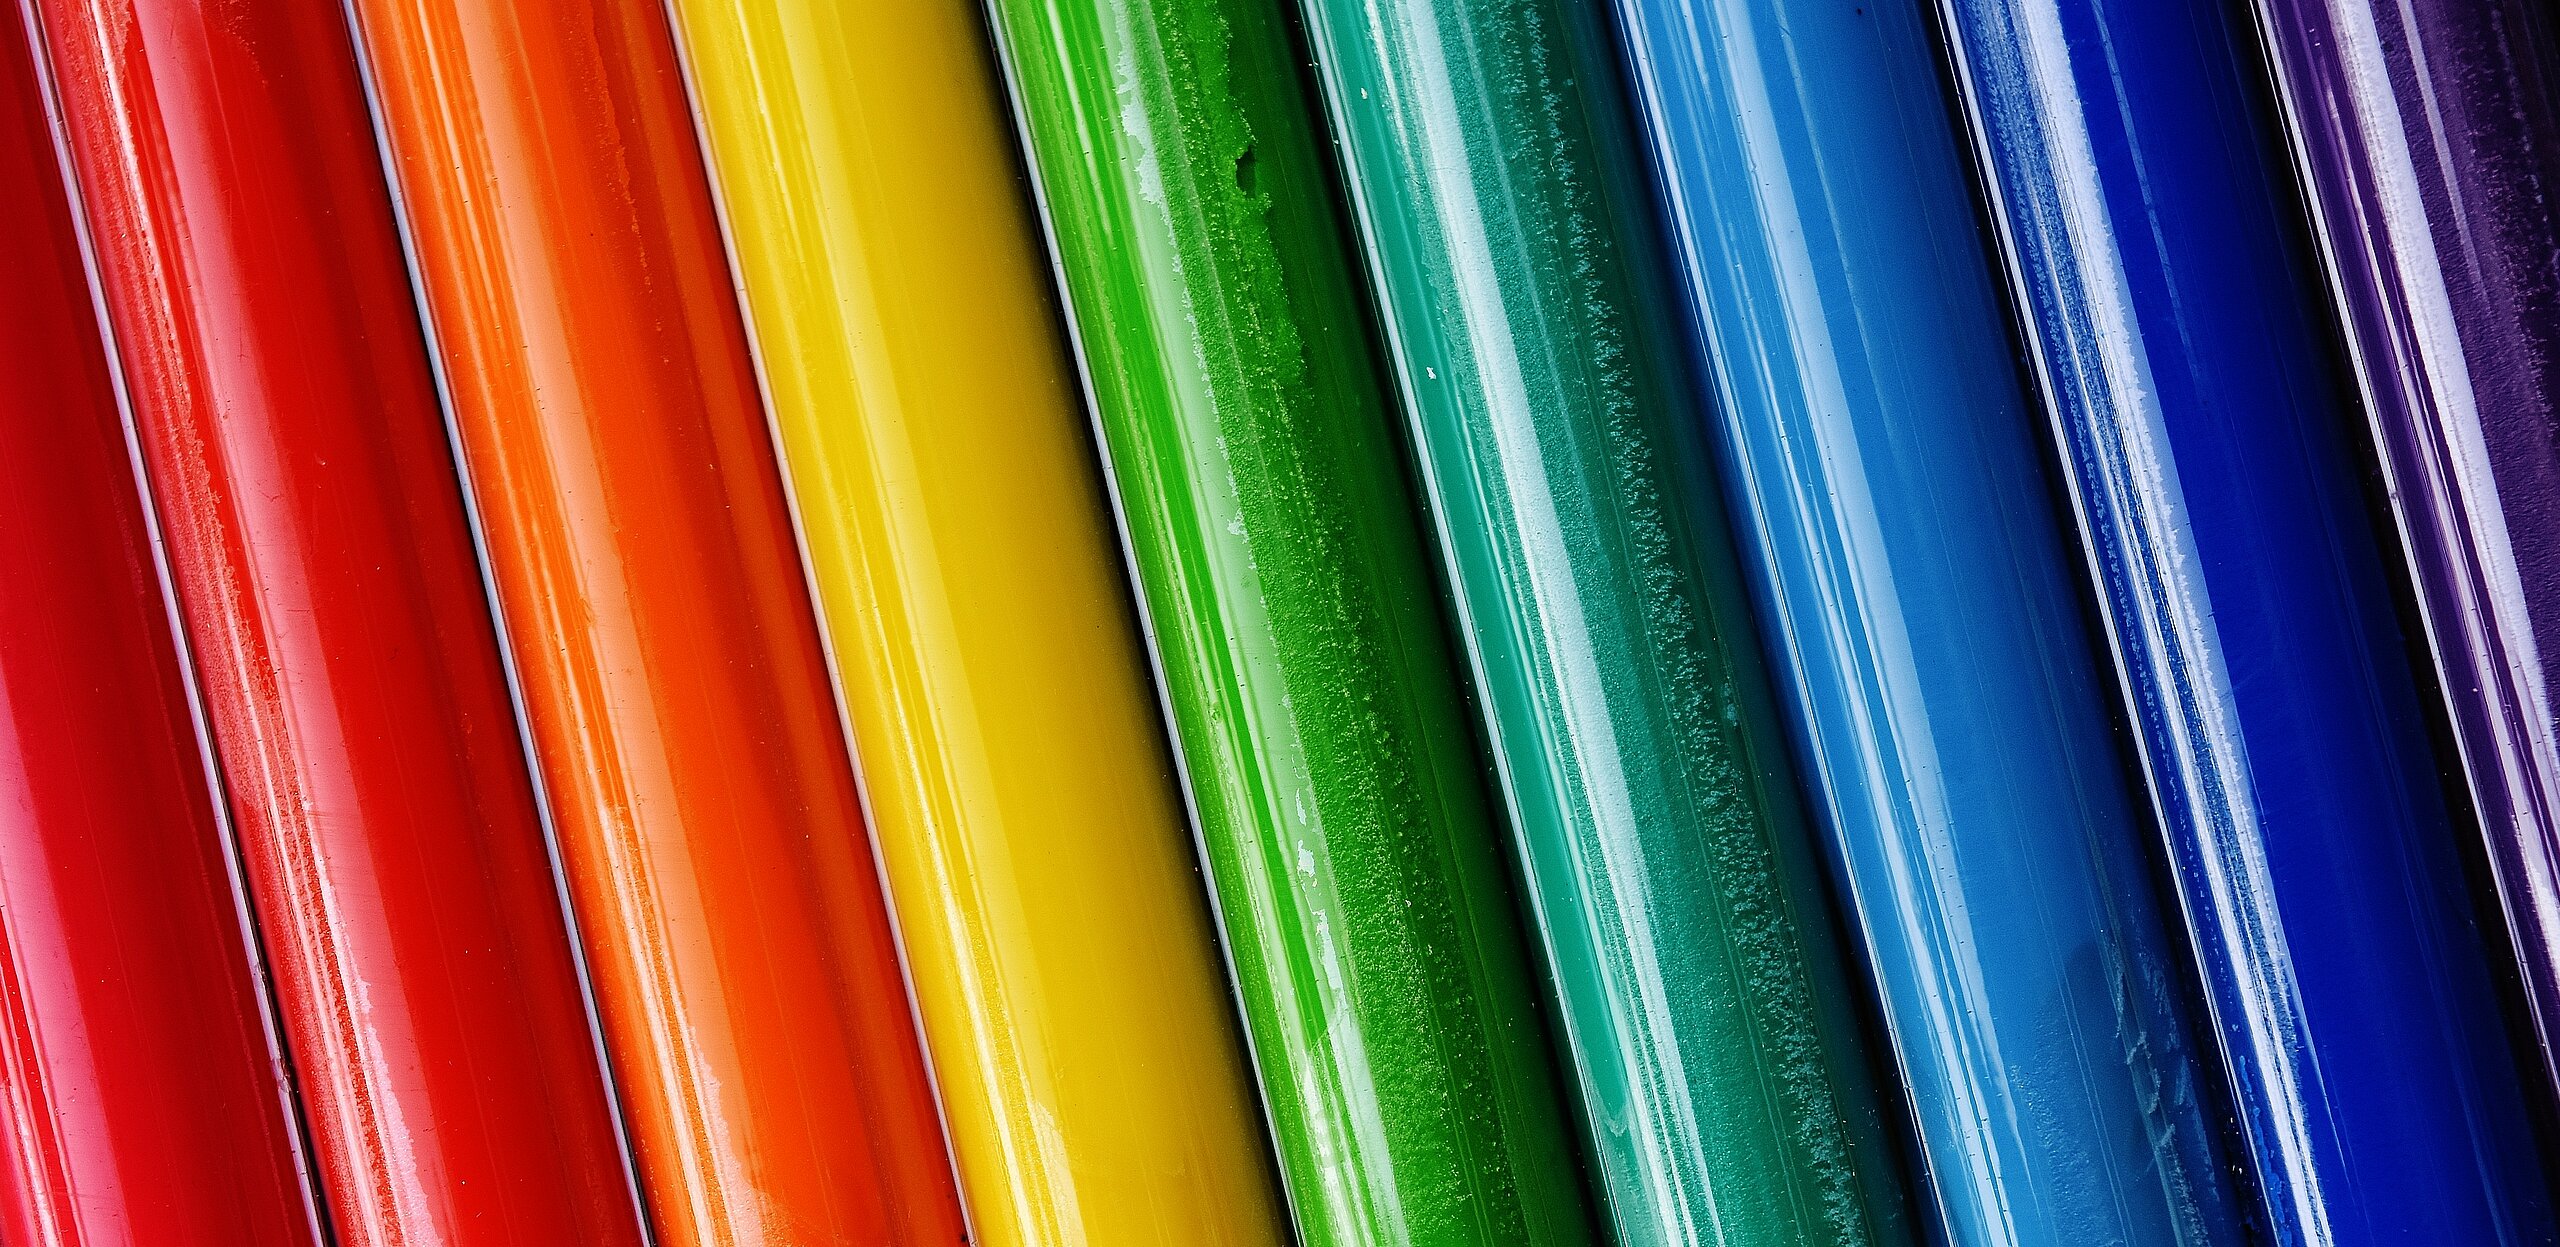 Differently coloured plastic tubes